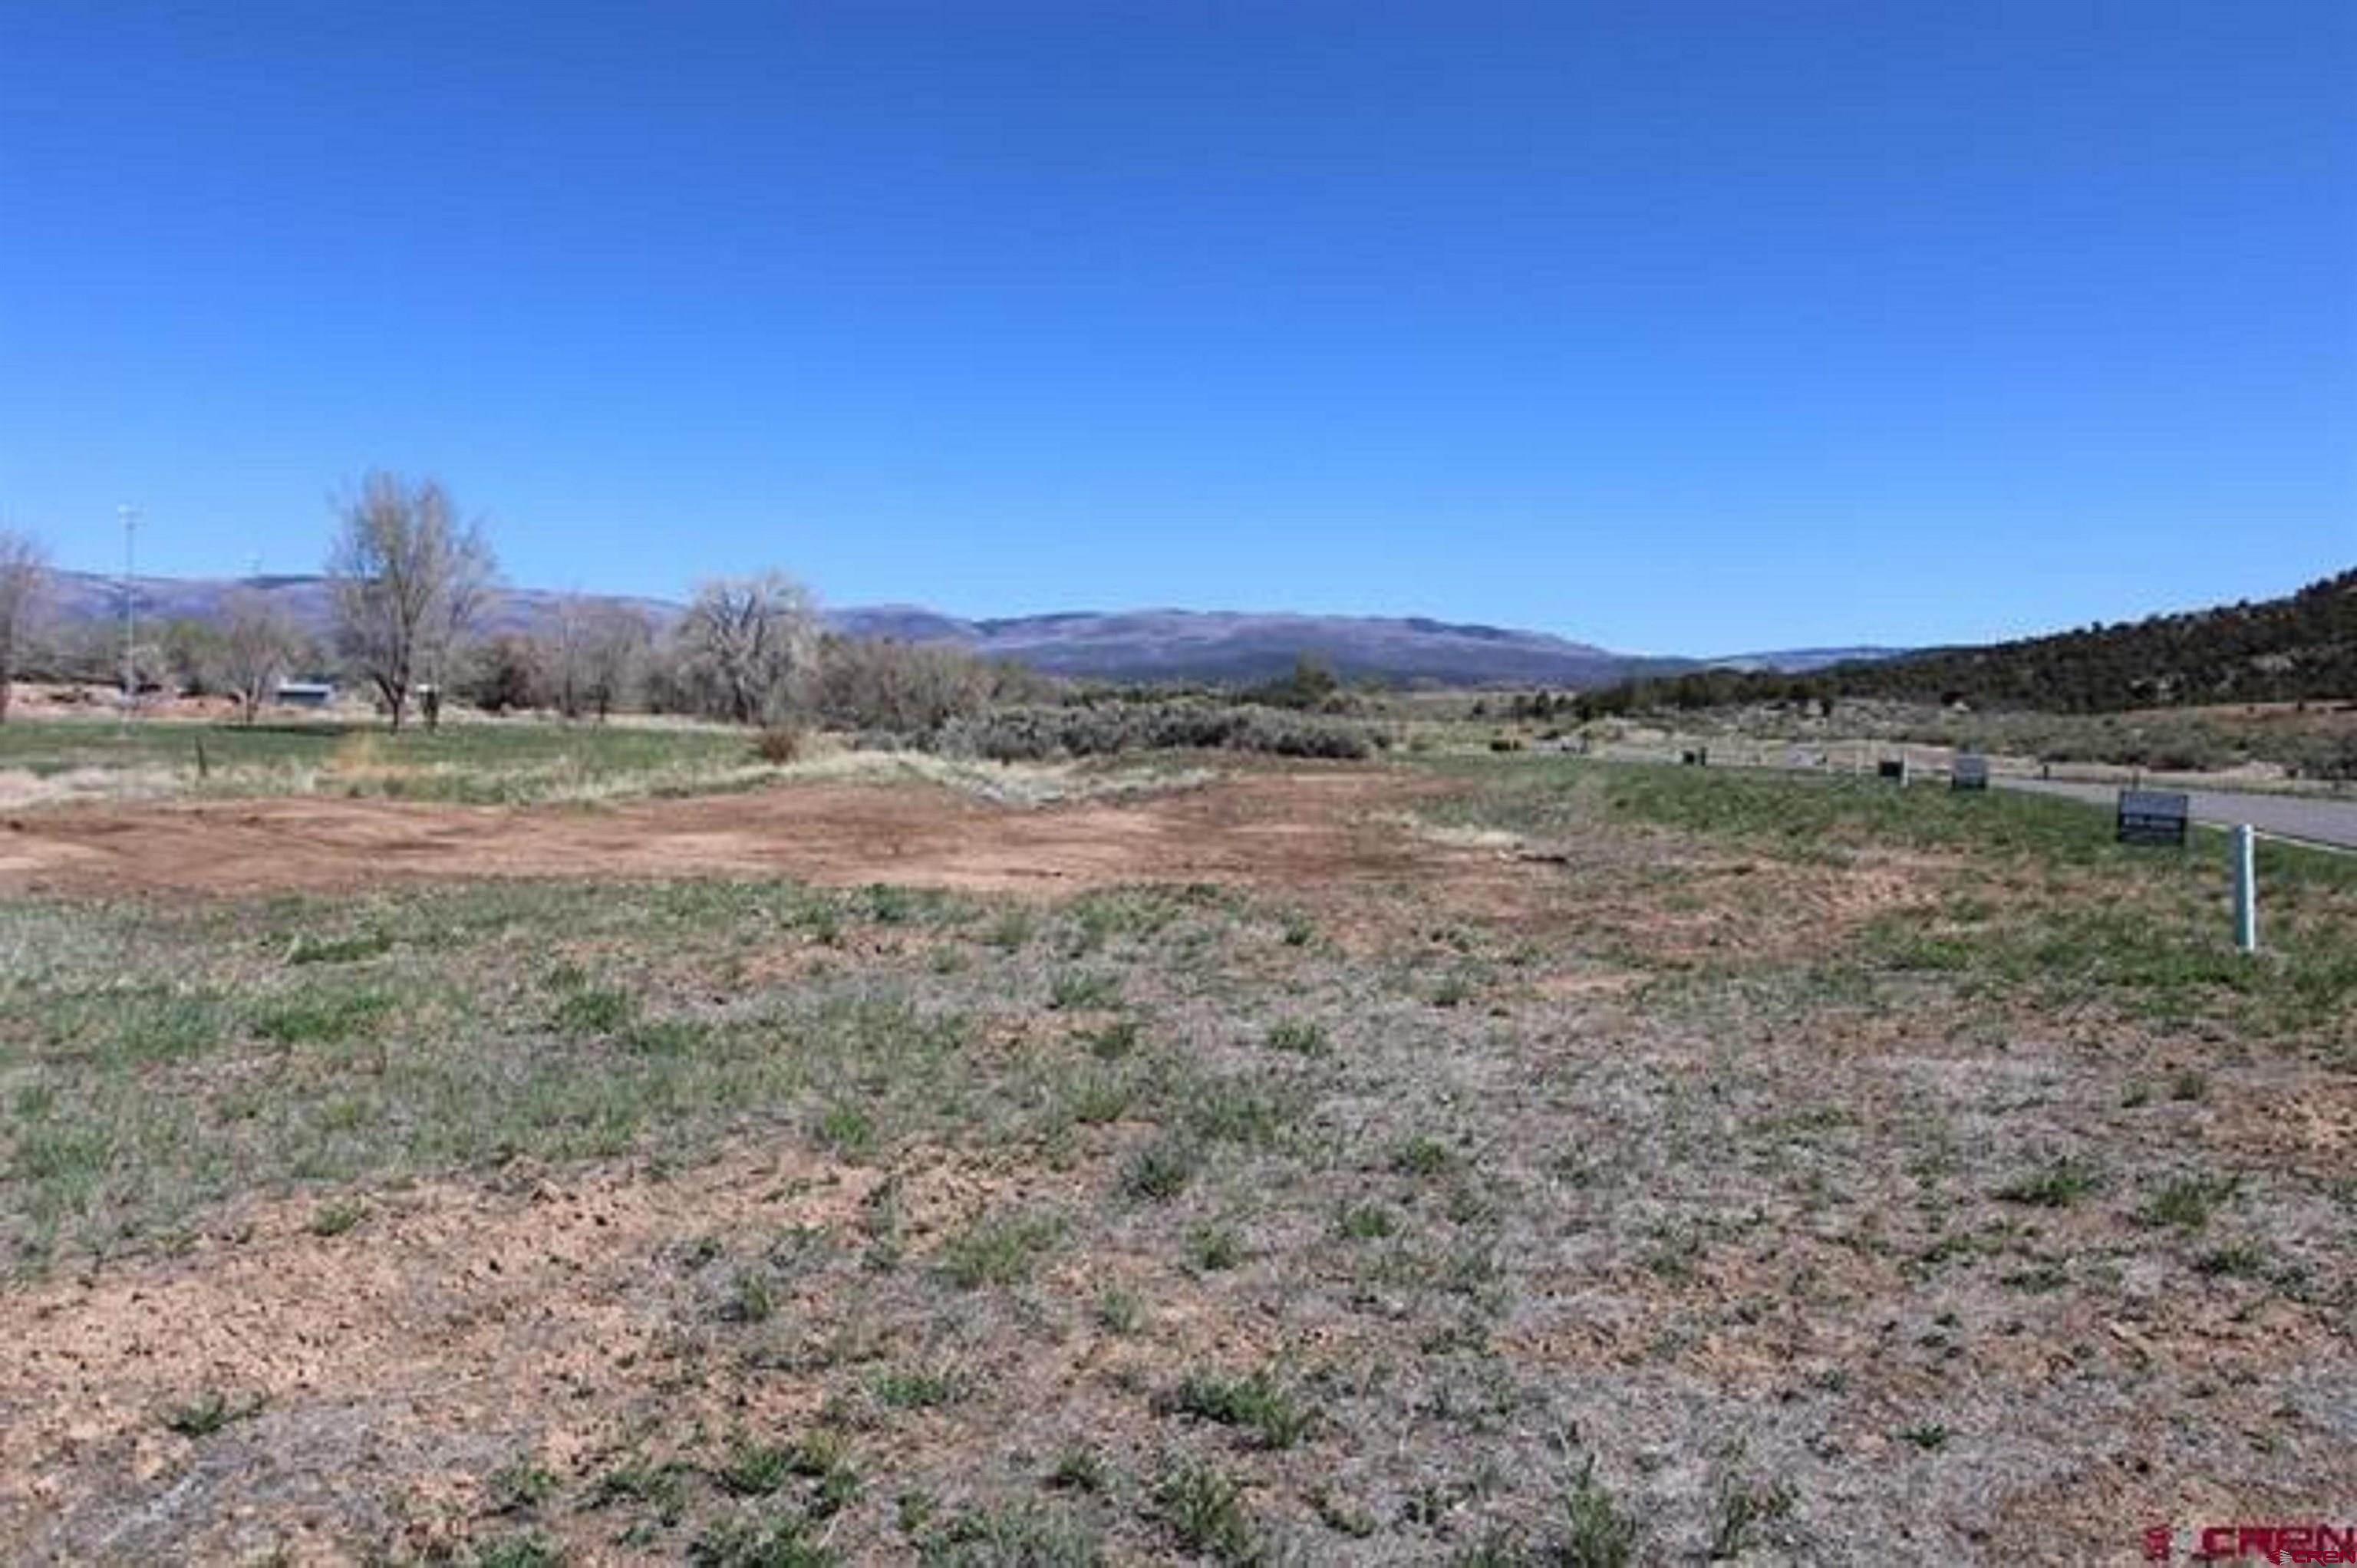 Great Golf Course lot located in Cedaredge Colorado  This lot is leveled with utilities very near and is ready to have your dream home built. Bring your builder, or we have one for you to meet! Within walking distance to the Cedaredge 18-Hole Golf Course and the walking trail along the constant flowing Surface Creek. Just a 30 minute drive to the top of Grand Mesa which is the largest flat top mesa in the world. Experience excellent snowshoeing, cross country skiing, down hill skiing, hiking, camping and fishing in over 300 lakes. Within one hour of the Powderhorn Ski Resort. Lot faces east with all utilities in place and ready to start building. Great Small town shops and restaurants to enjoy. Water and sewer taps are available to purchase through the Town of Cedaredge.